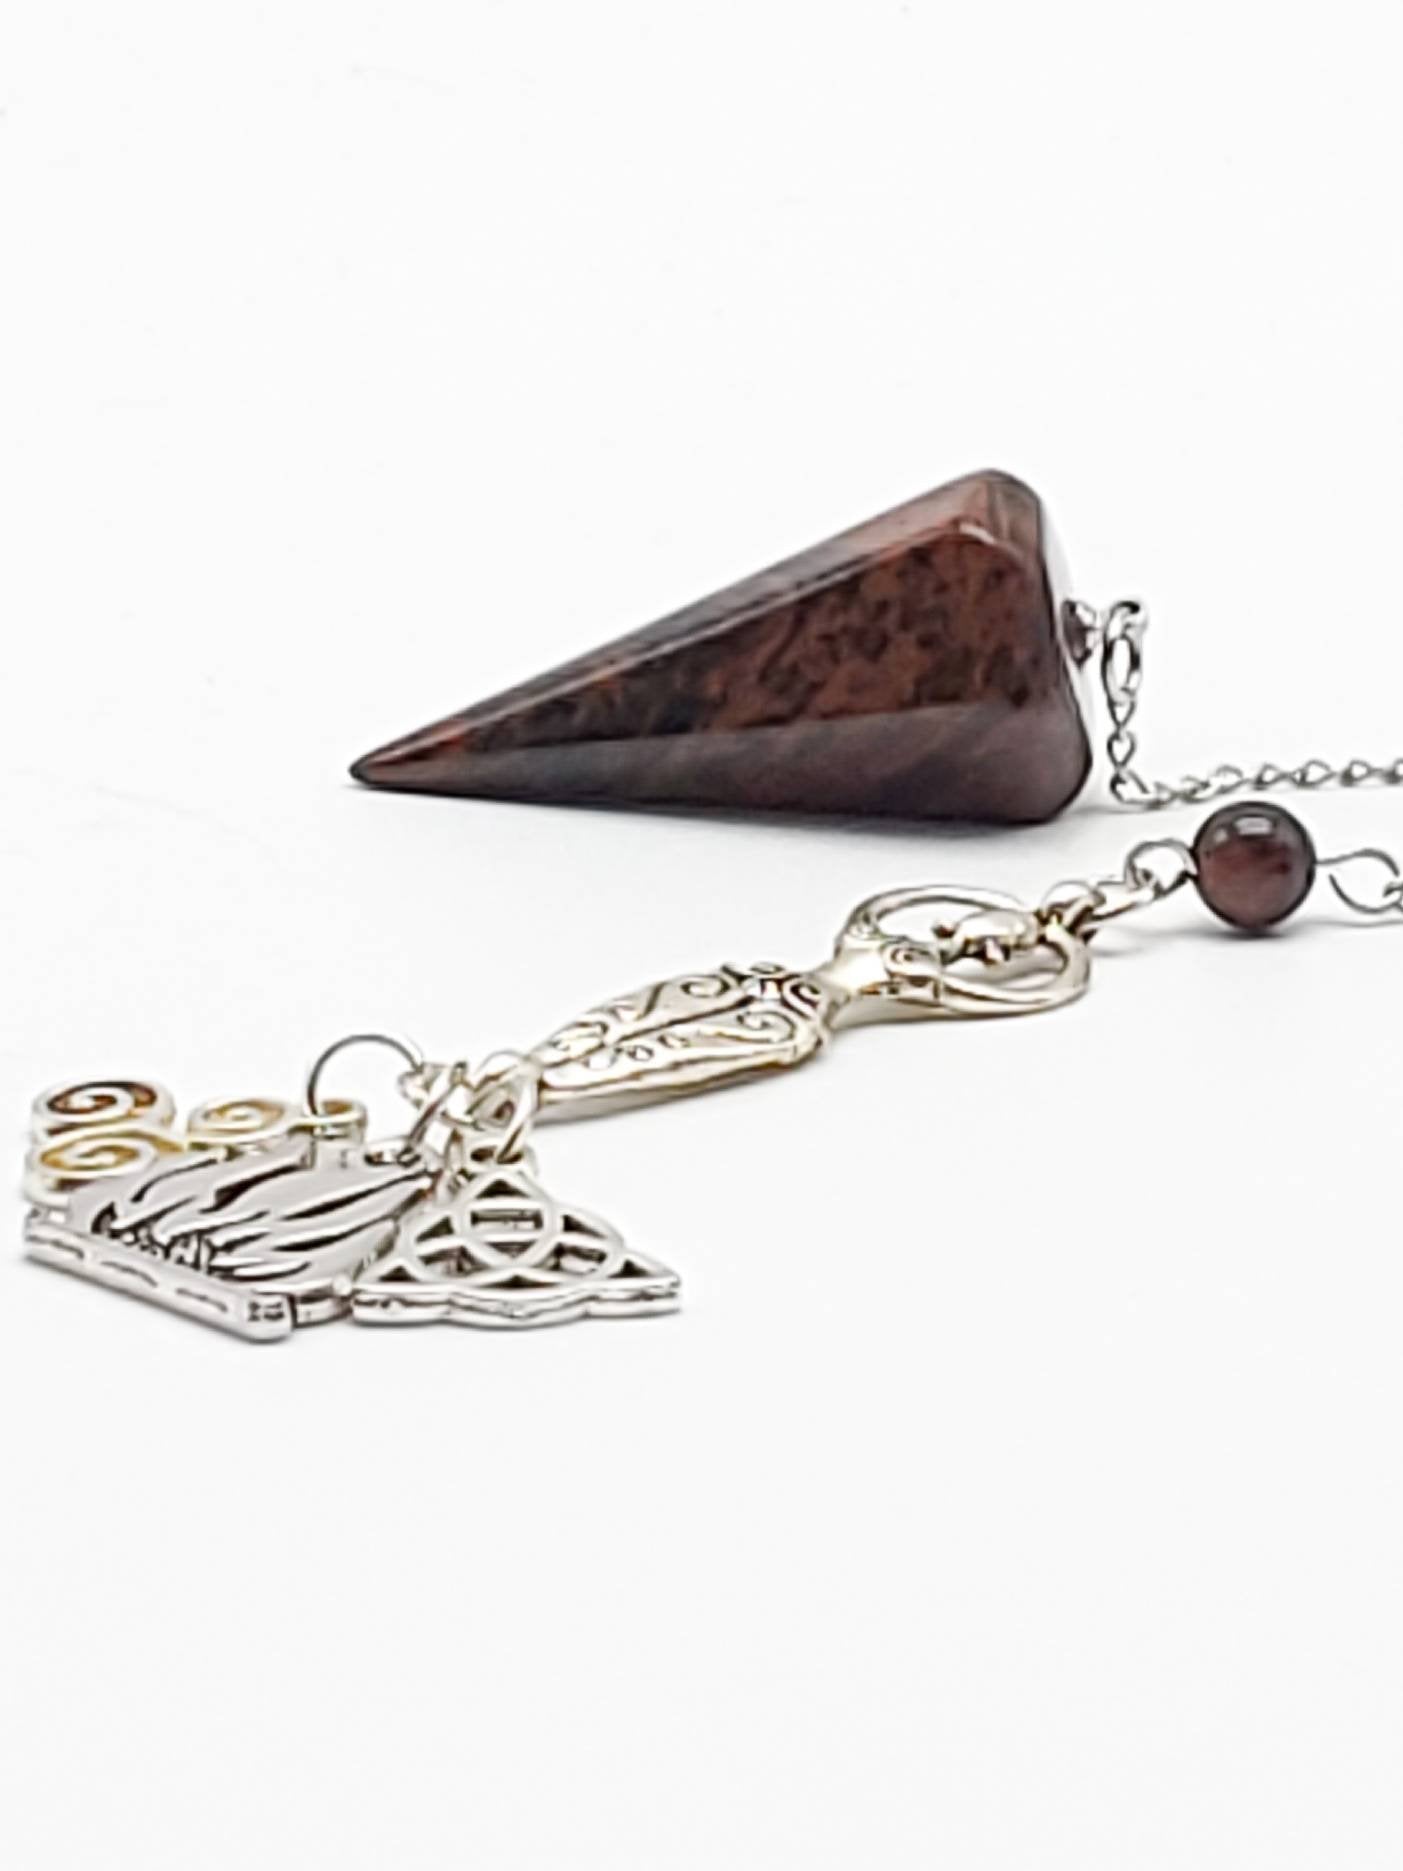 Mahogany Obsidian Pendulum with Goddess, Triskelion, Triquera and Fire Charms - The Caffeinated Raven